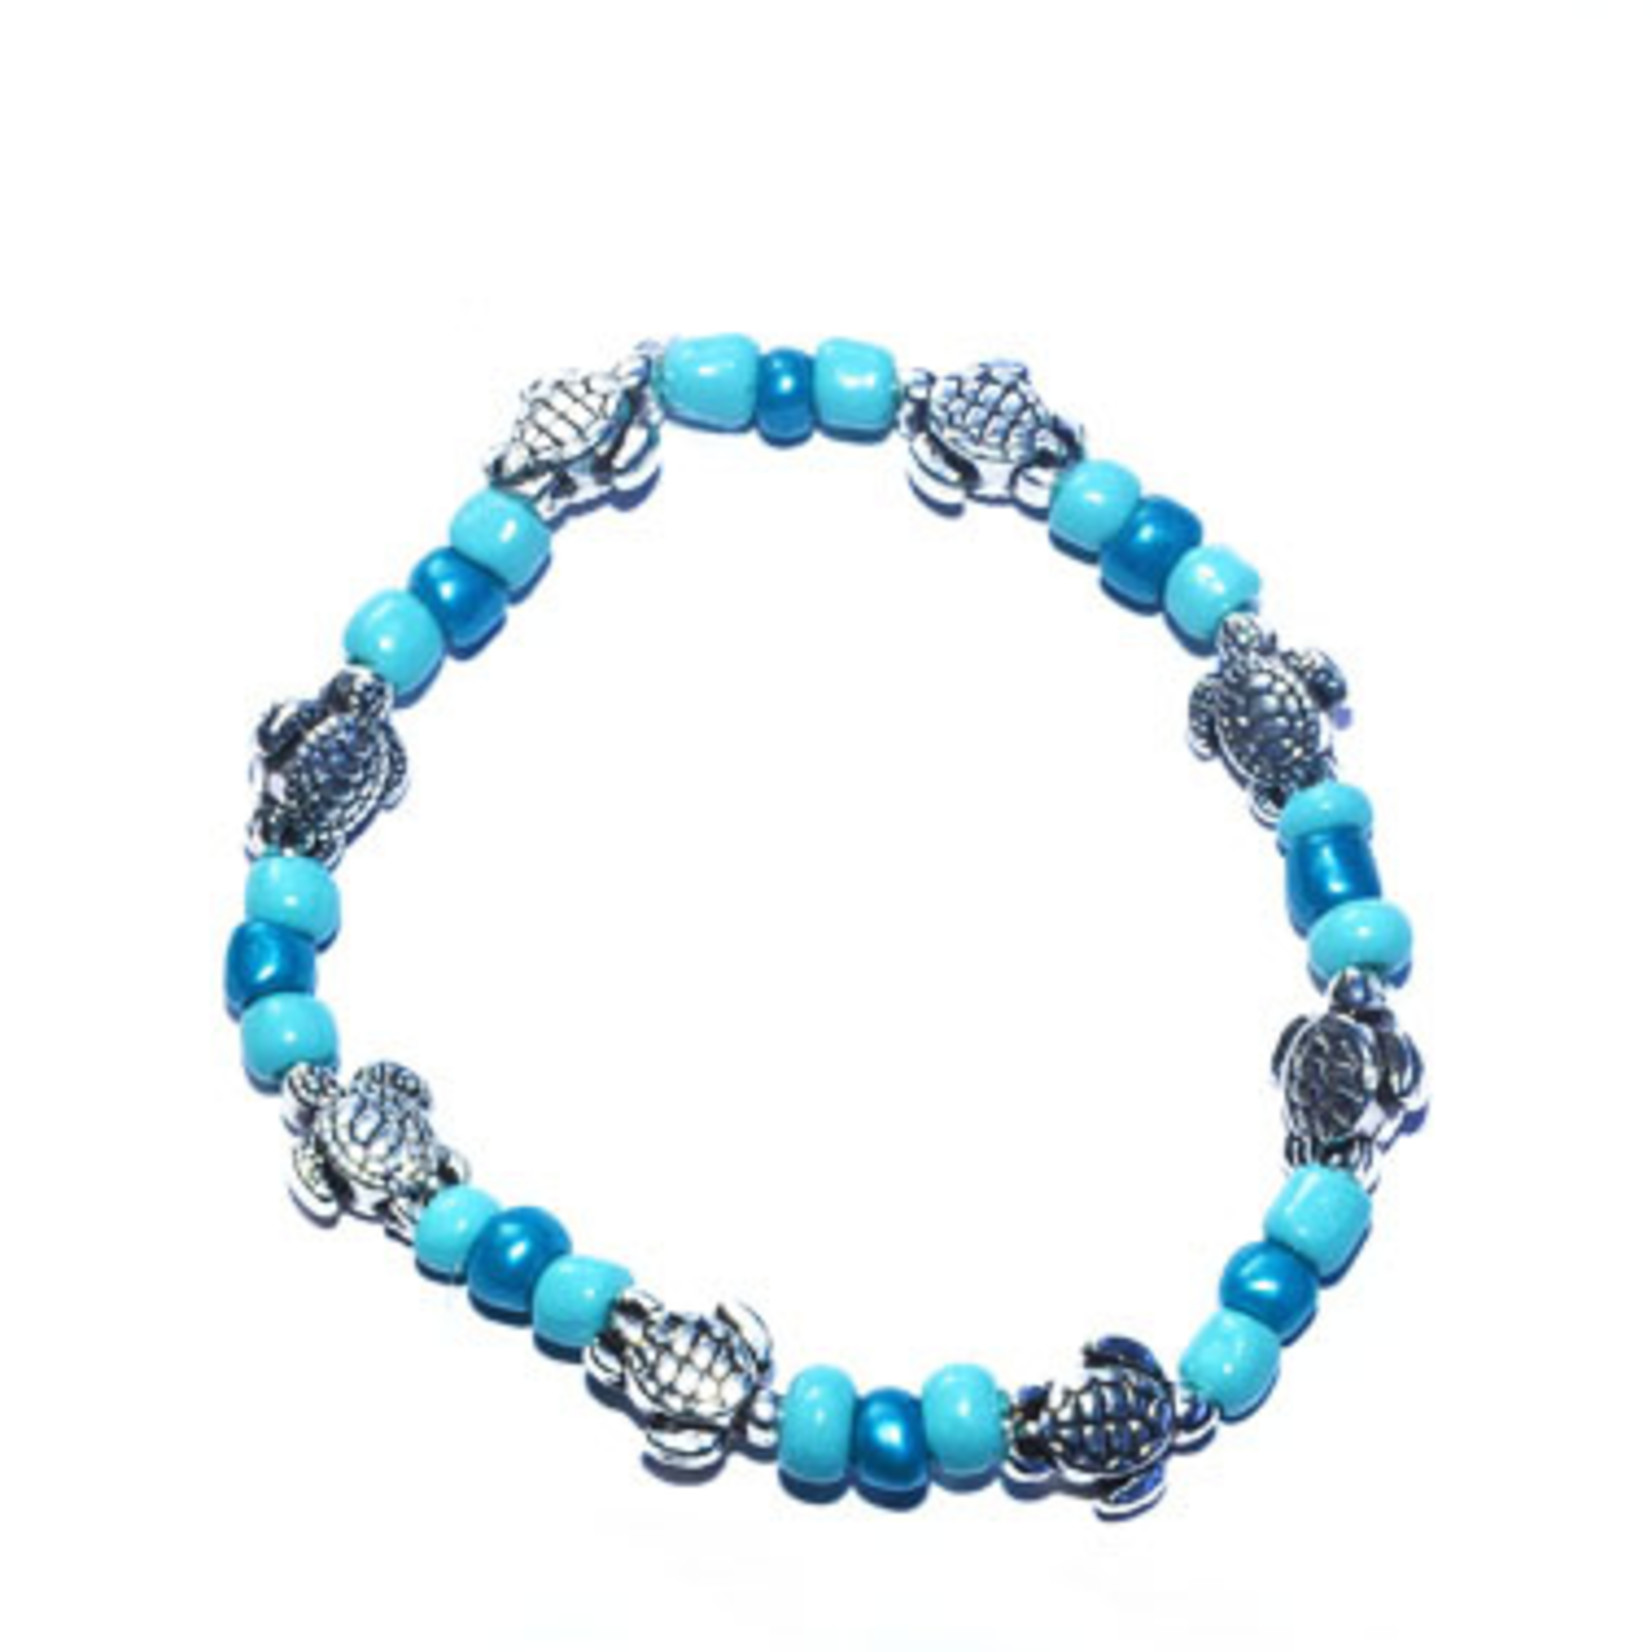 Pack of 5 Beaded Stretch Bracelets with Silver Turtle Beads for Kids Blue Green